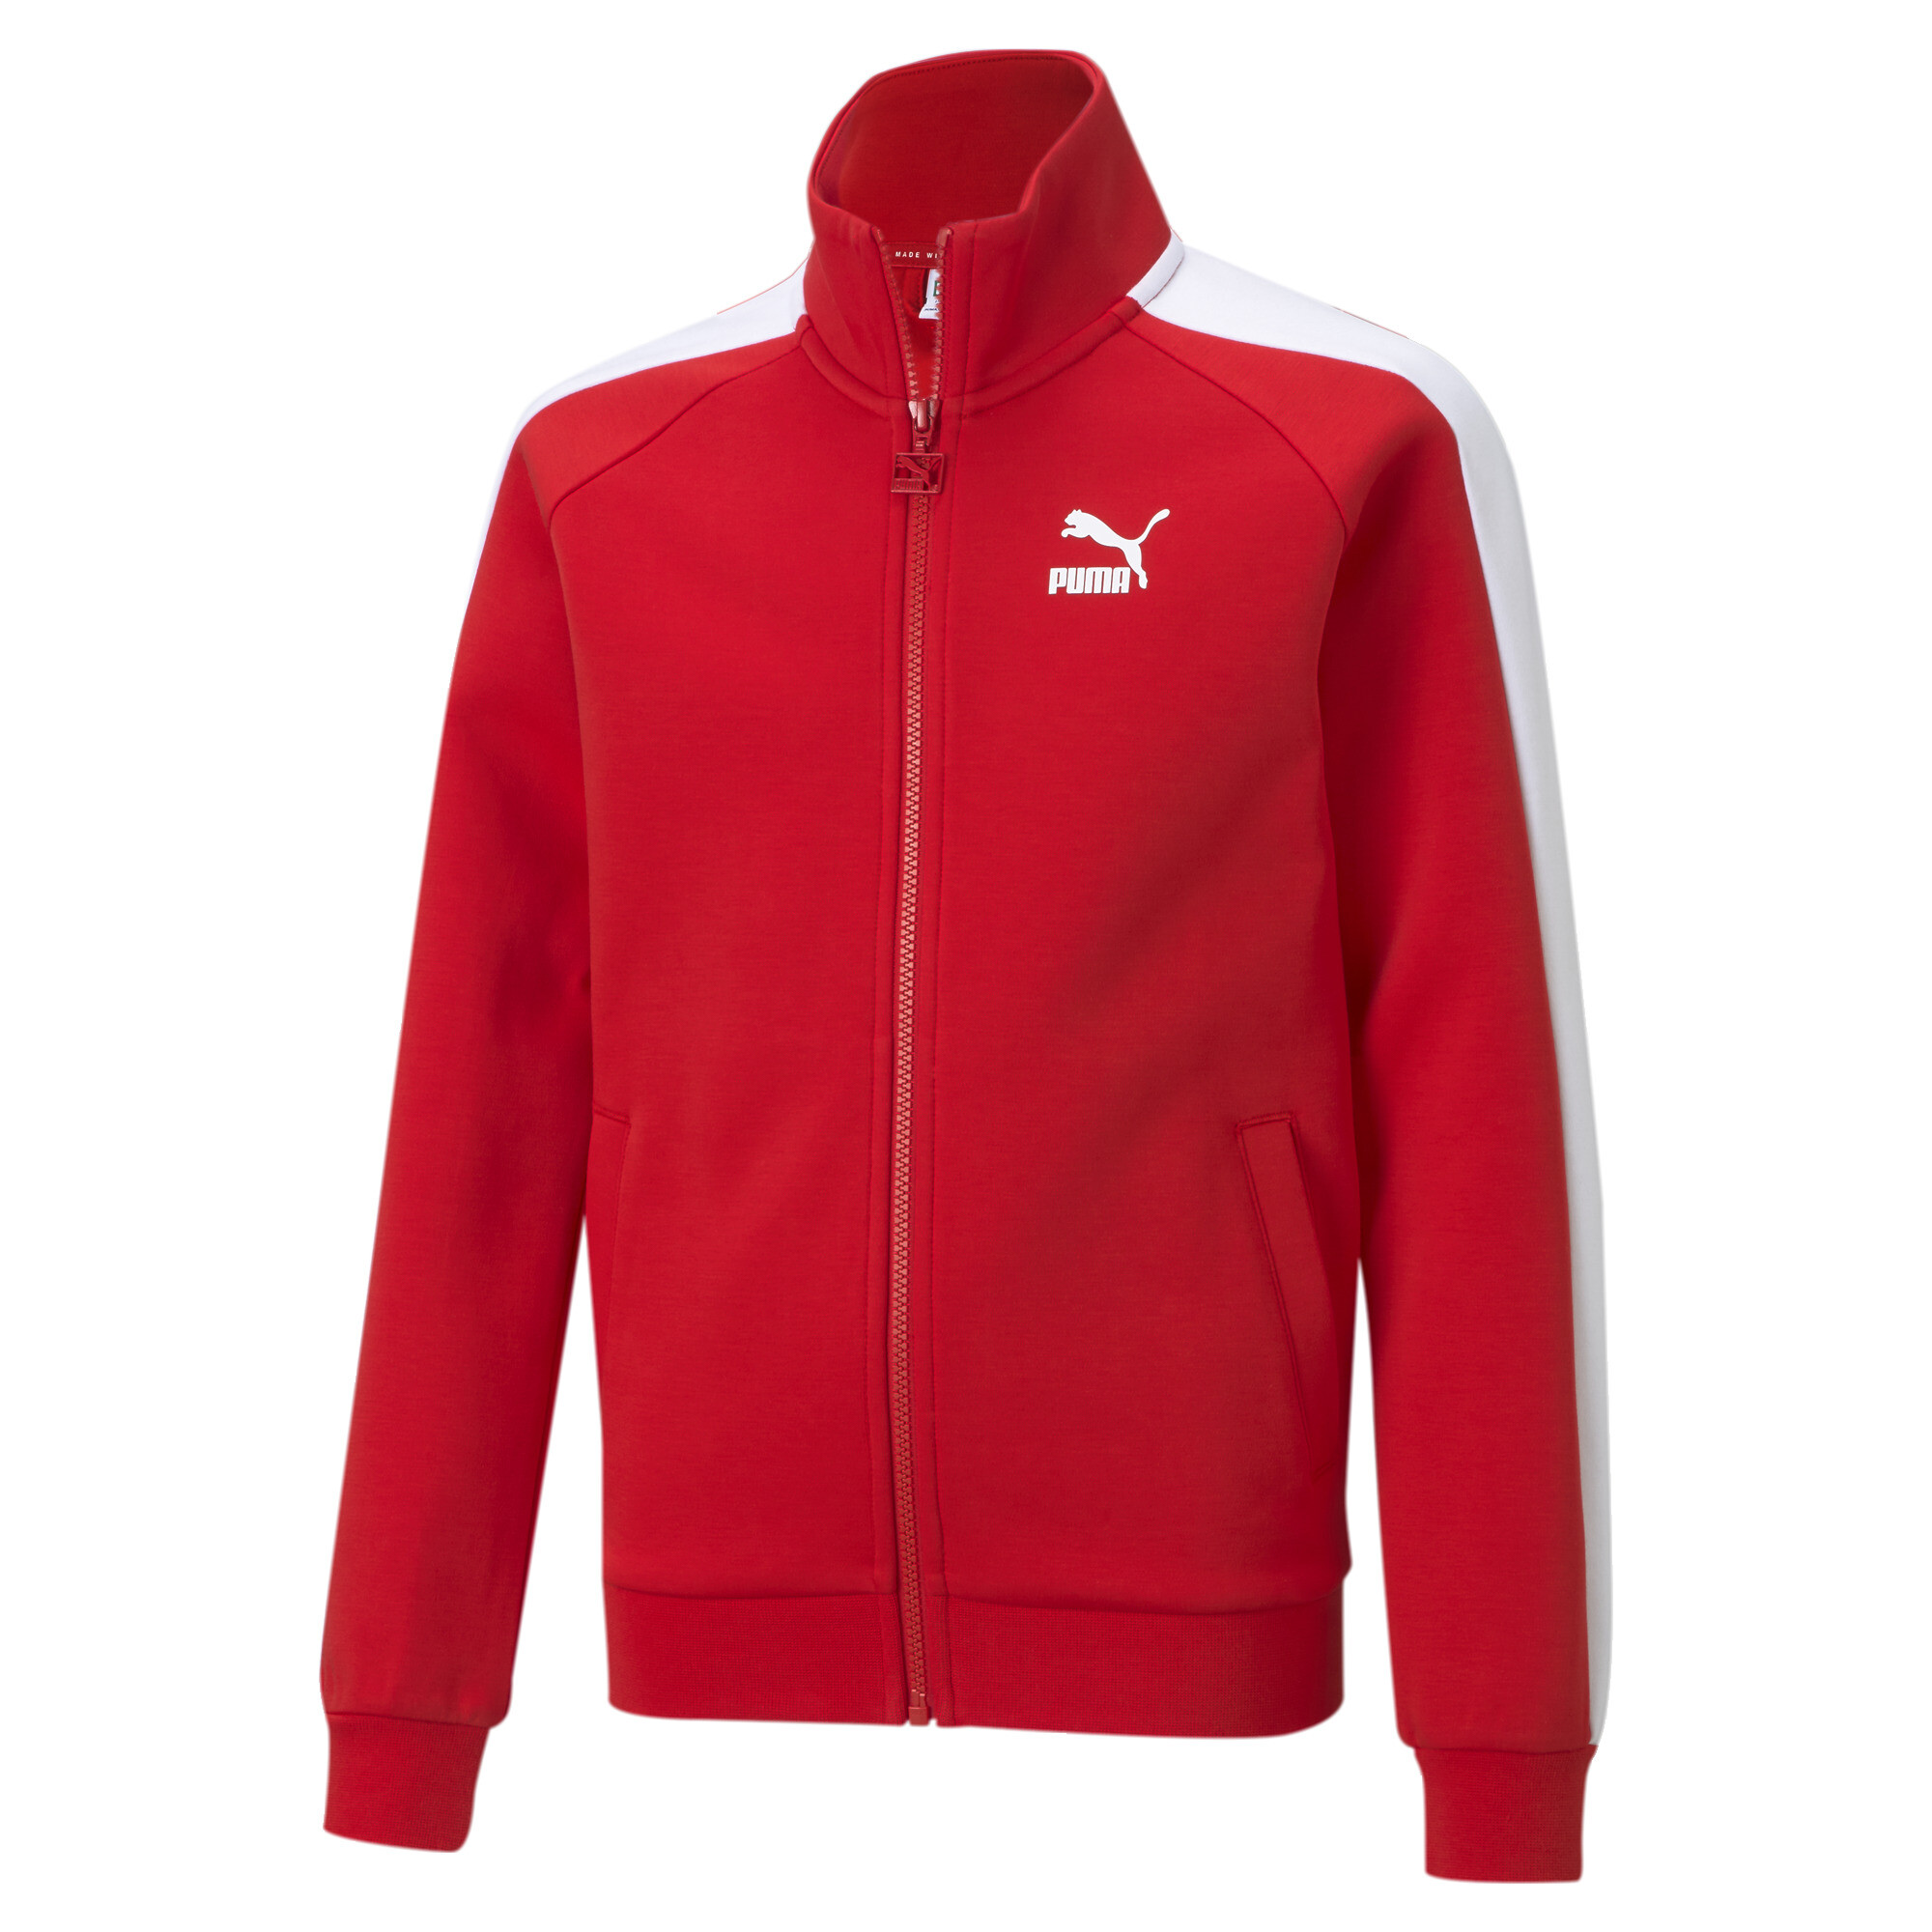 PUMA Iconic T7 Track Jacket In Red, Size 3-4 Youth